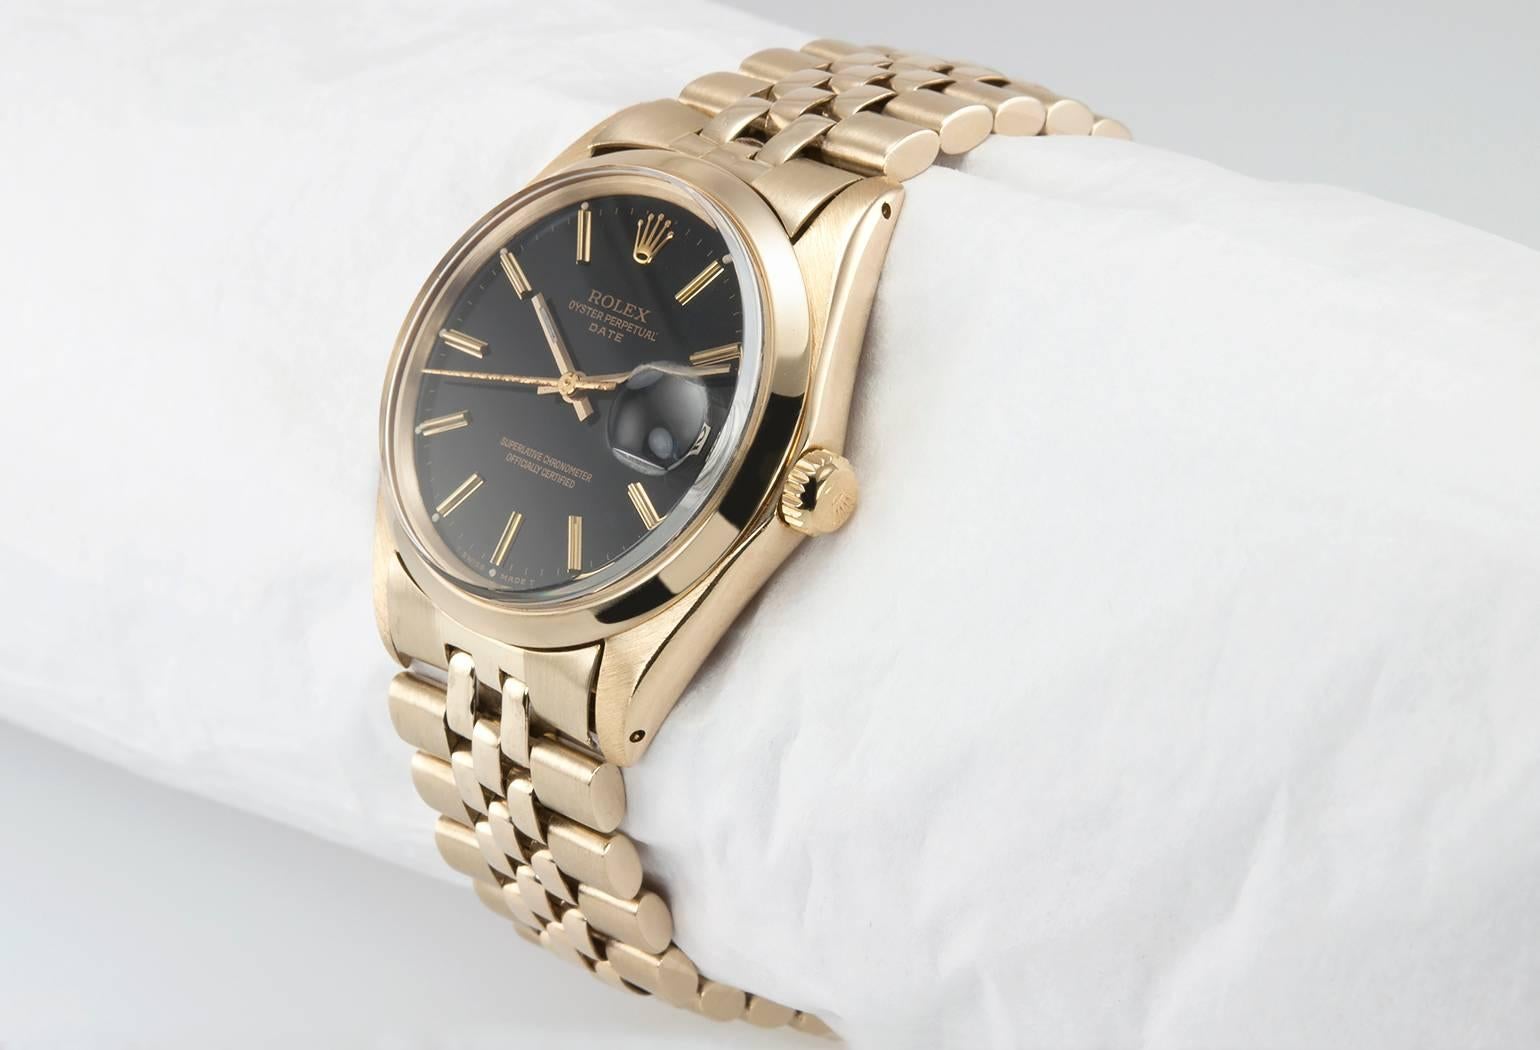 Rolex Date wristwatch in 14 karat yellow gold, reference 1503-8. This classic  Rolex features a 14 karat yellow gold smooth bezel with a yellow gold locking crown, a black original dial, and a 14 karat yellow gold jubilee style bracelet. Circa 1966.